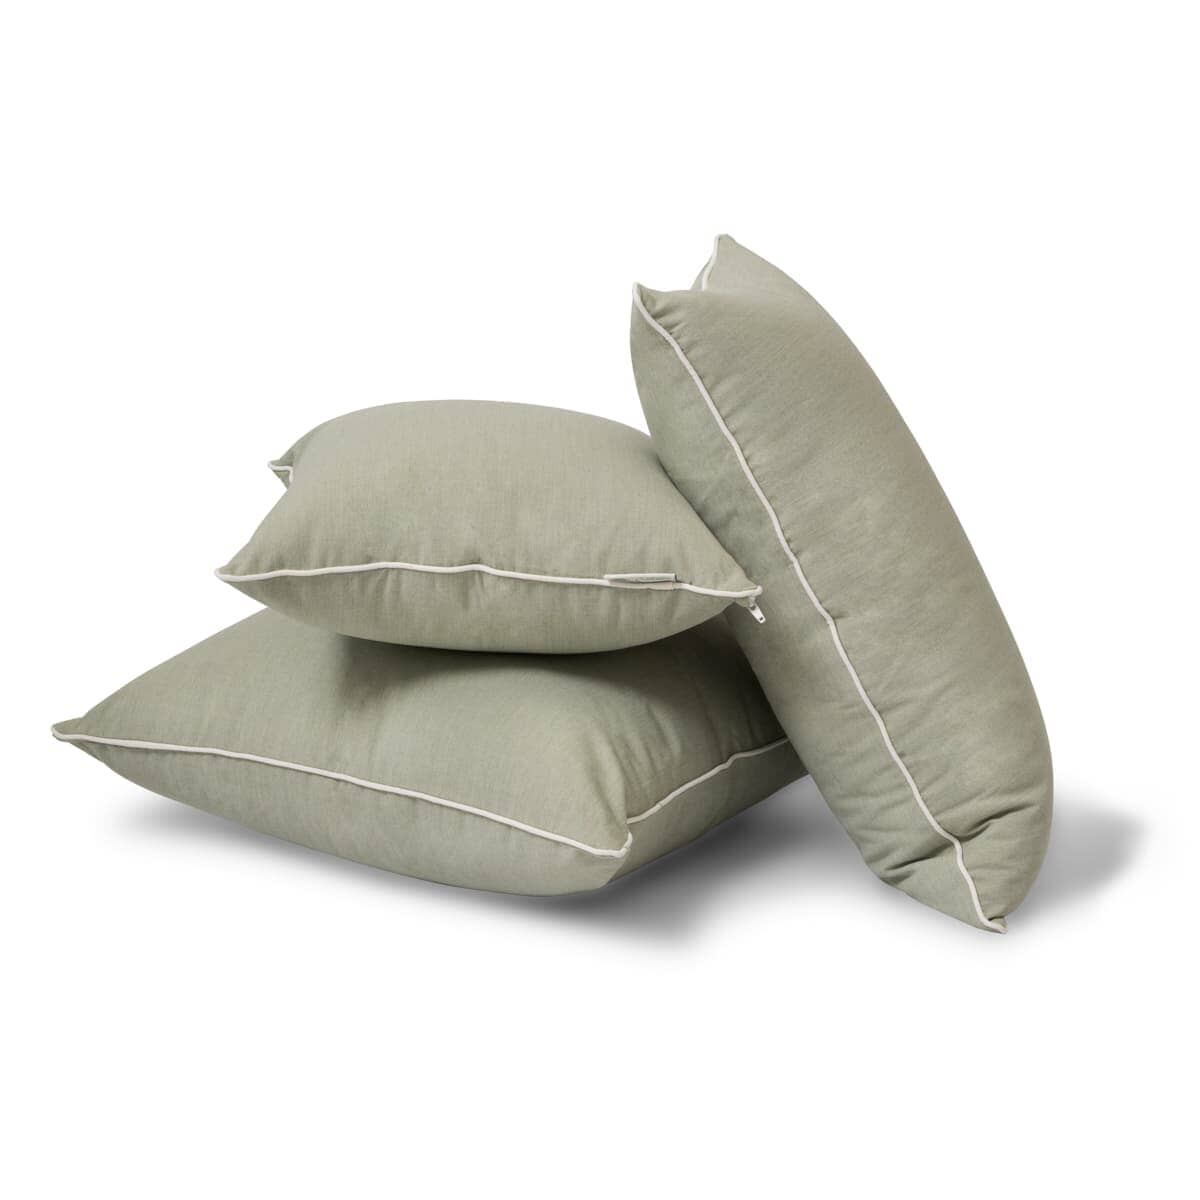 Studio image of stack of green pillows